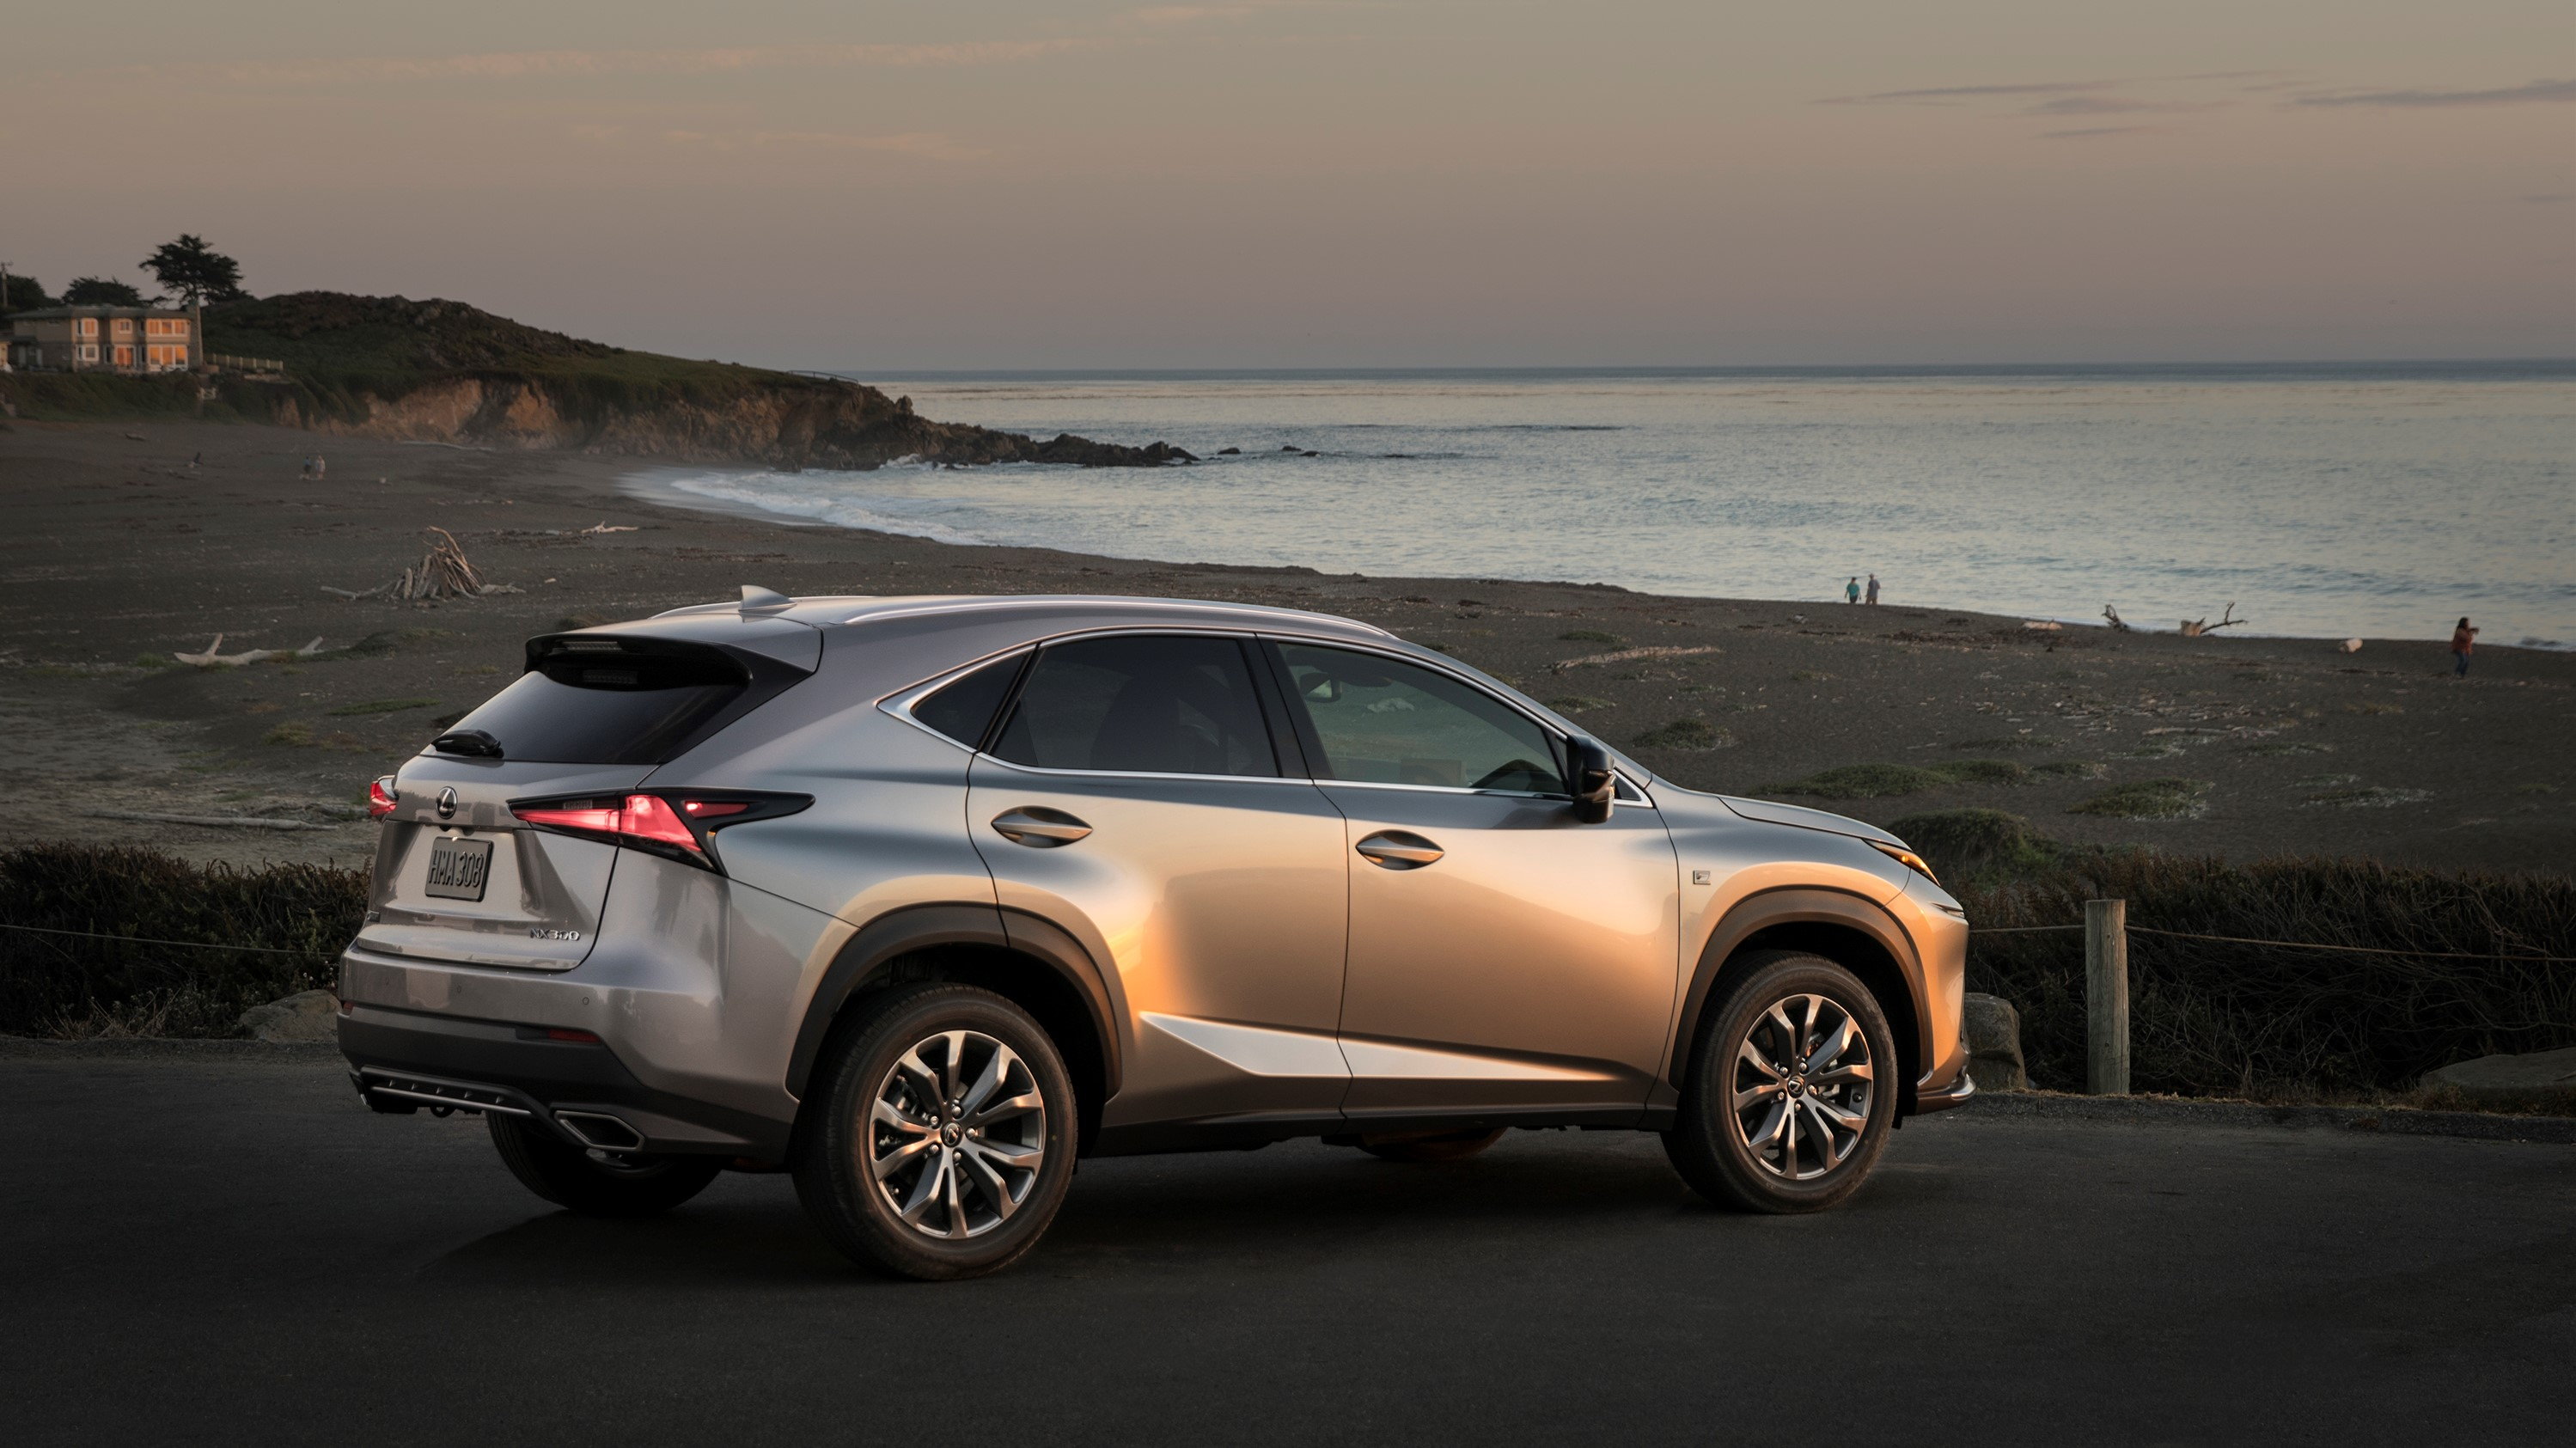 Will the Redesigned 2022 NX Have a Brand New Engine Lineup